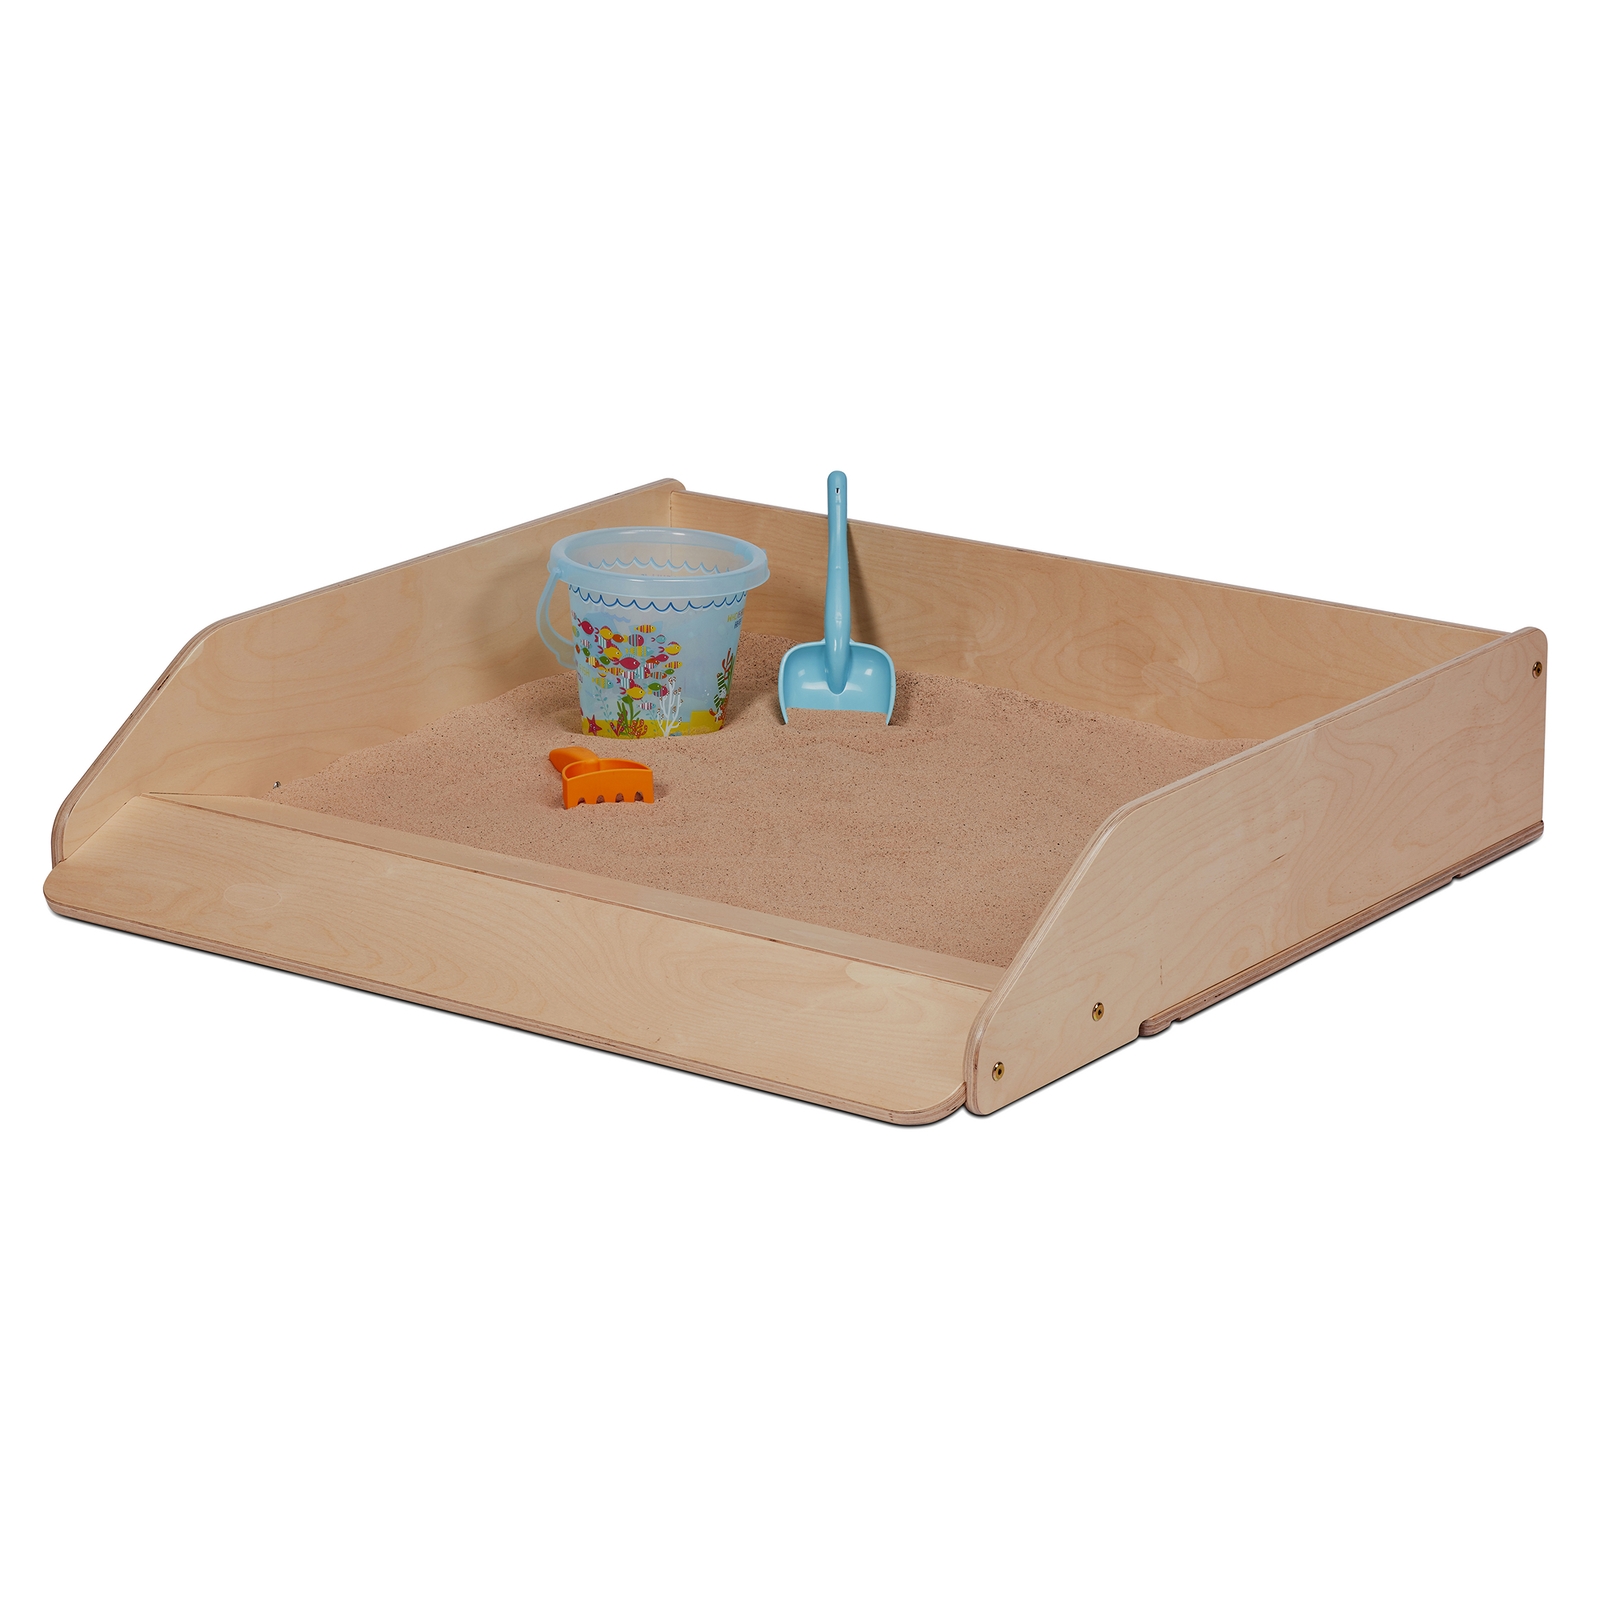 Wooden Crawl In Sand Pit - 1190 x 660 x 1200mm - Each